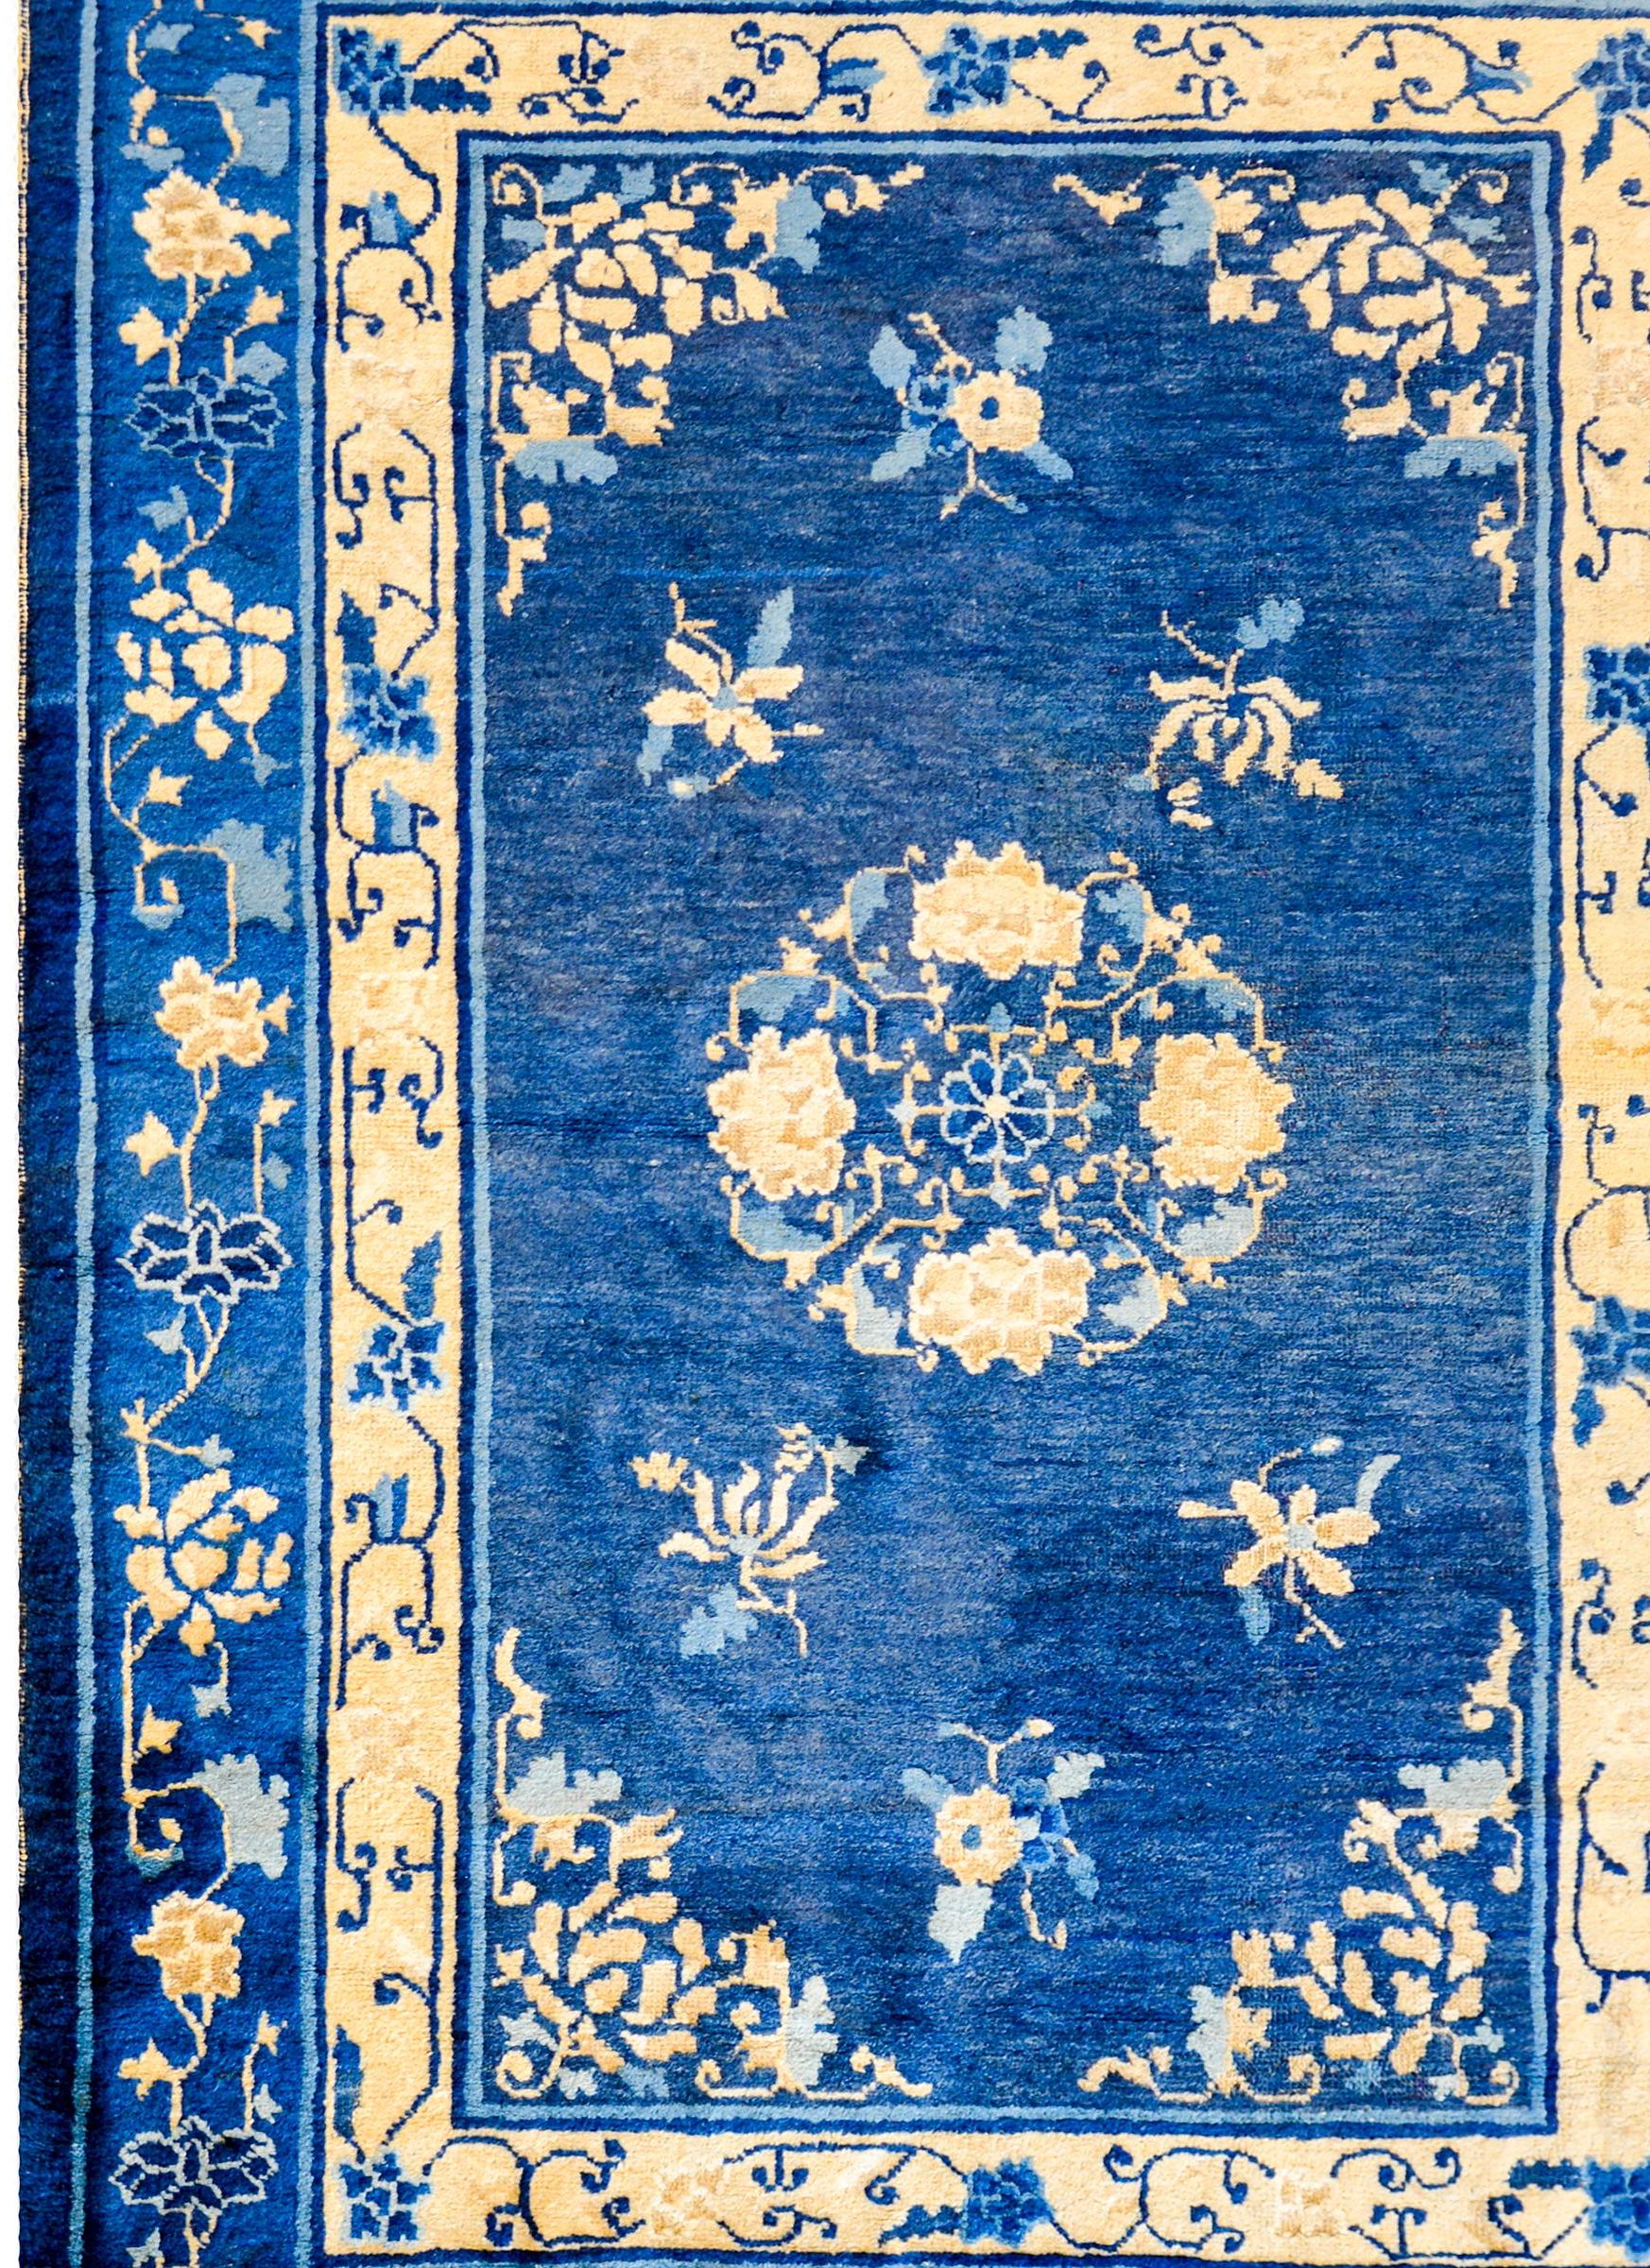 A wonderful early 20th century Peking rug woven in a fantastic indigo and cream color-way, with a large central peony and butterfly medallion amidst a field of chrysanthemums. The border is complex with two distinct peony and leafy vine patterned